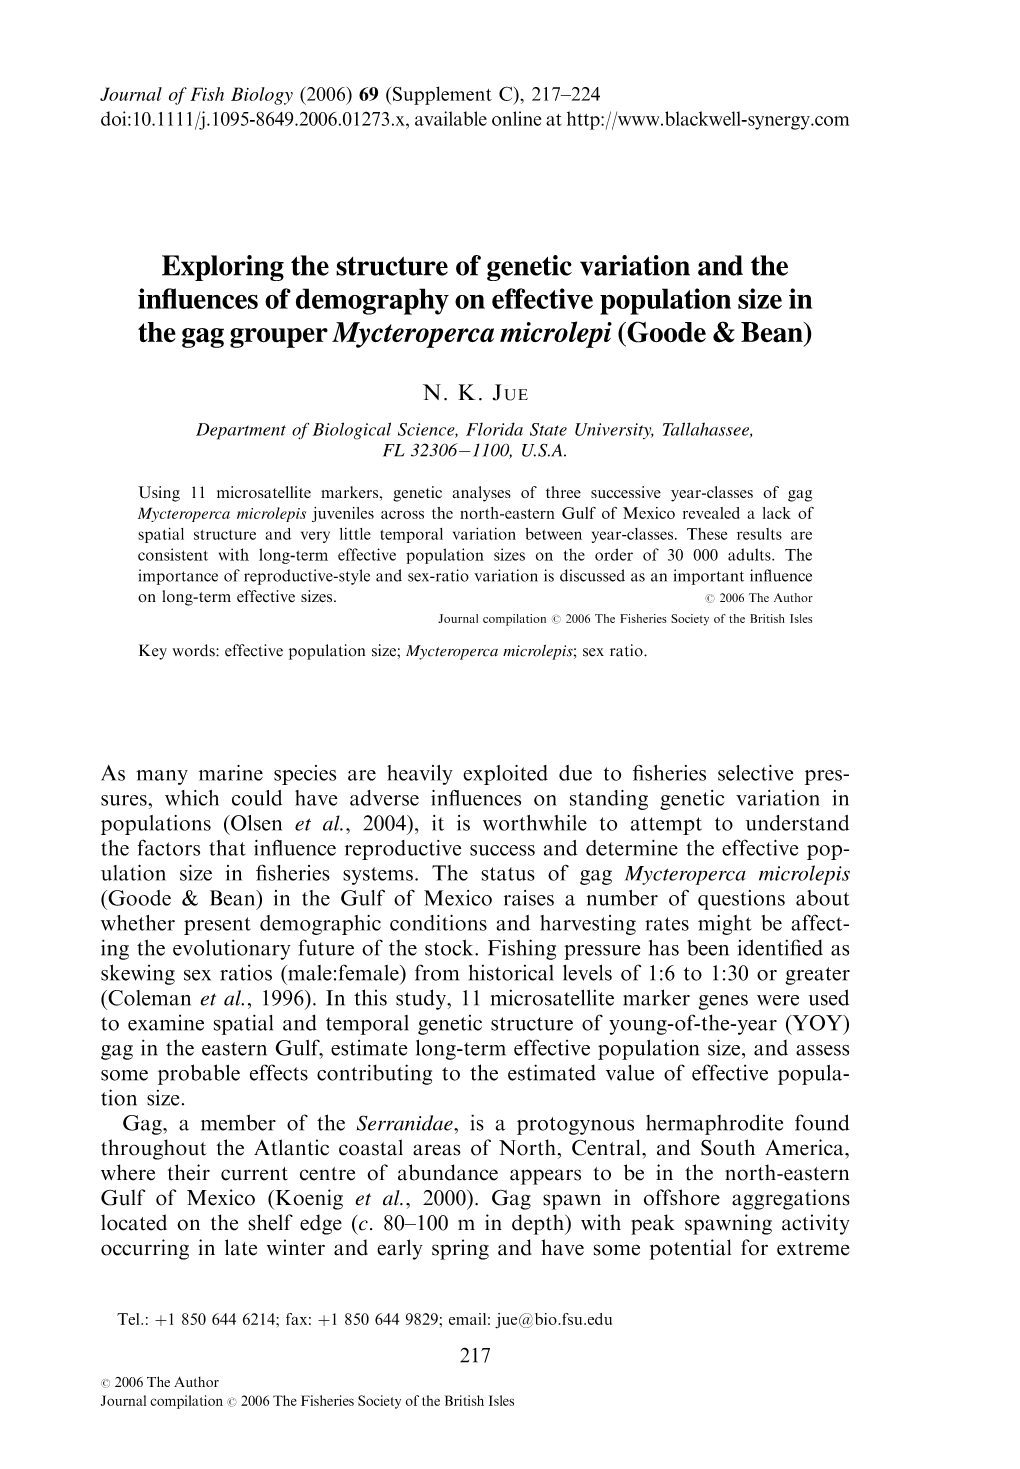 Exploring the Structure of Genetic Variation and the Influences of Demography on Effective Population Size in the Gag Grouper My